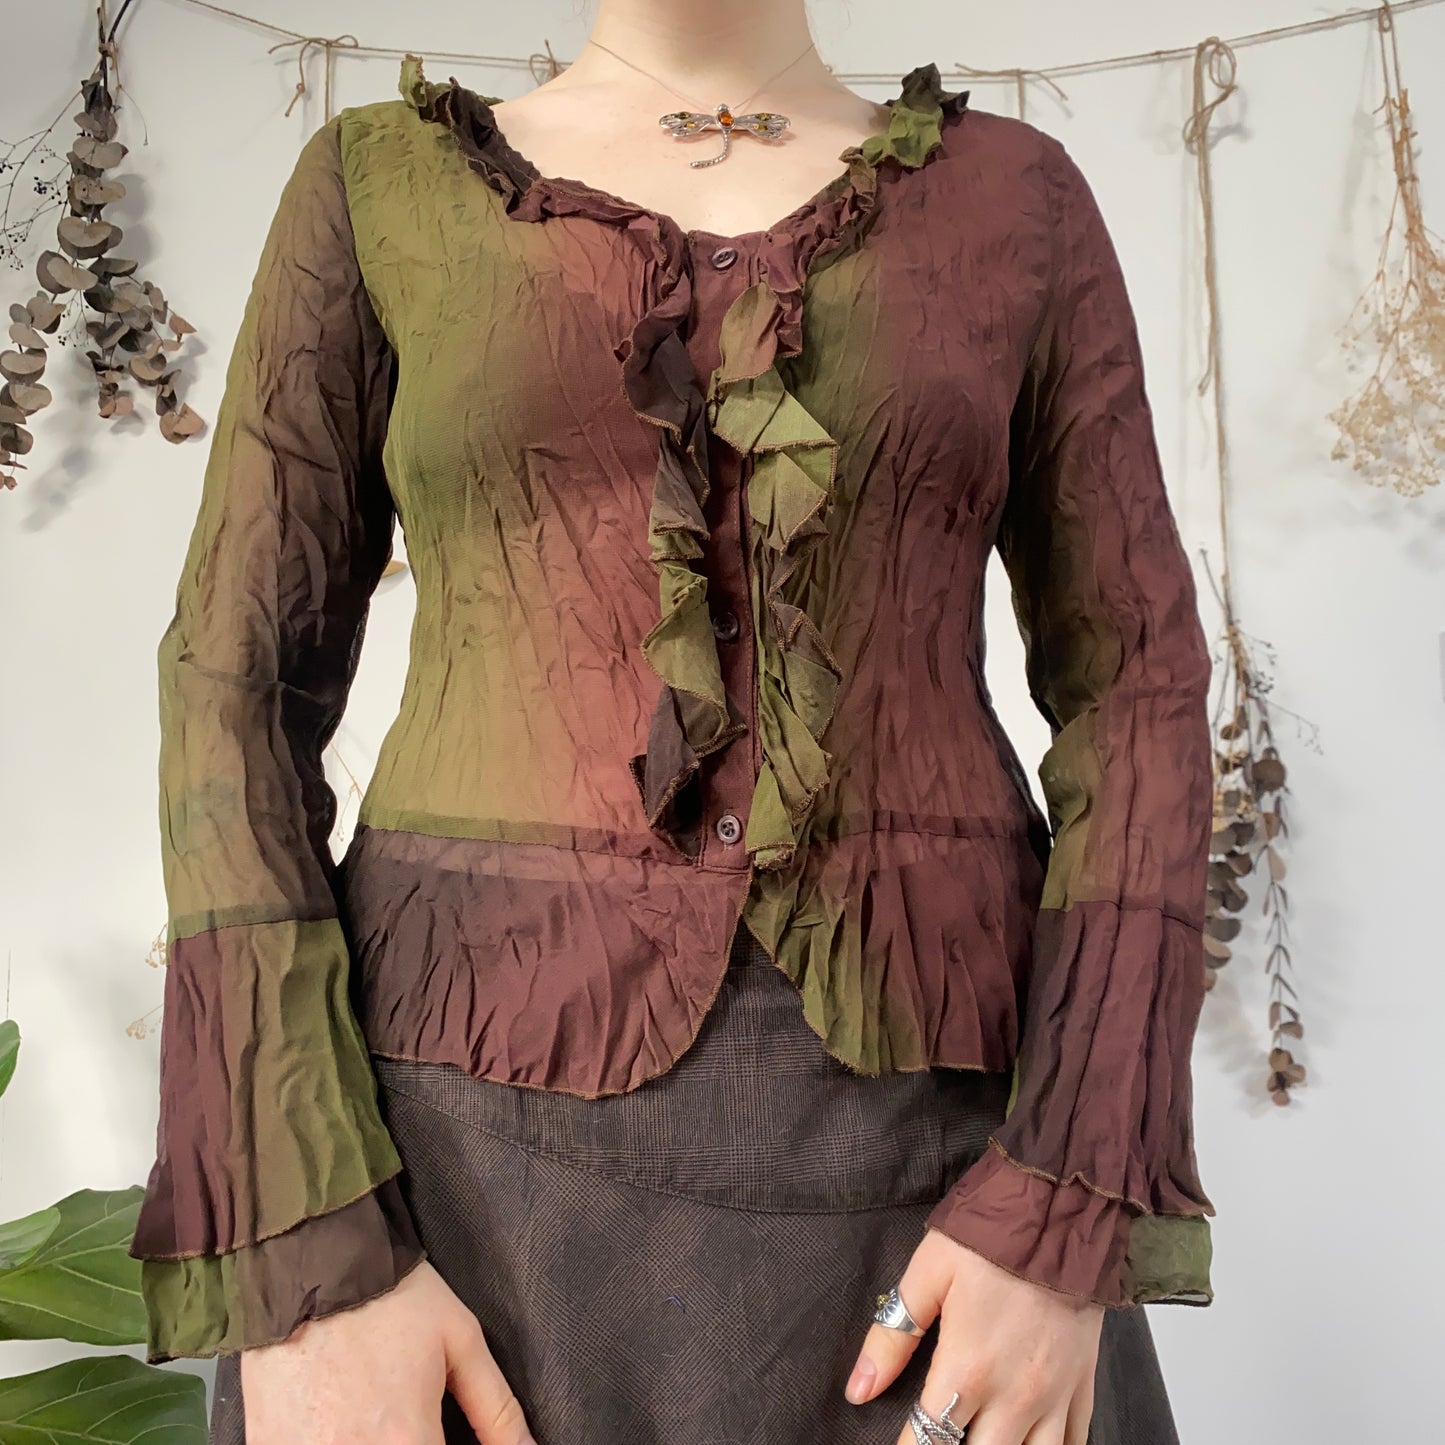 Earthy grunge top - size M